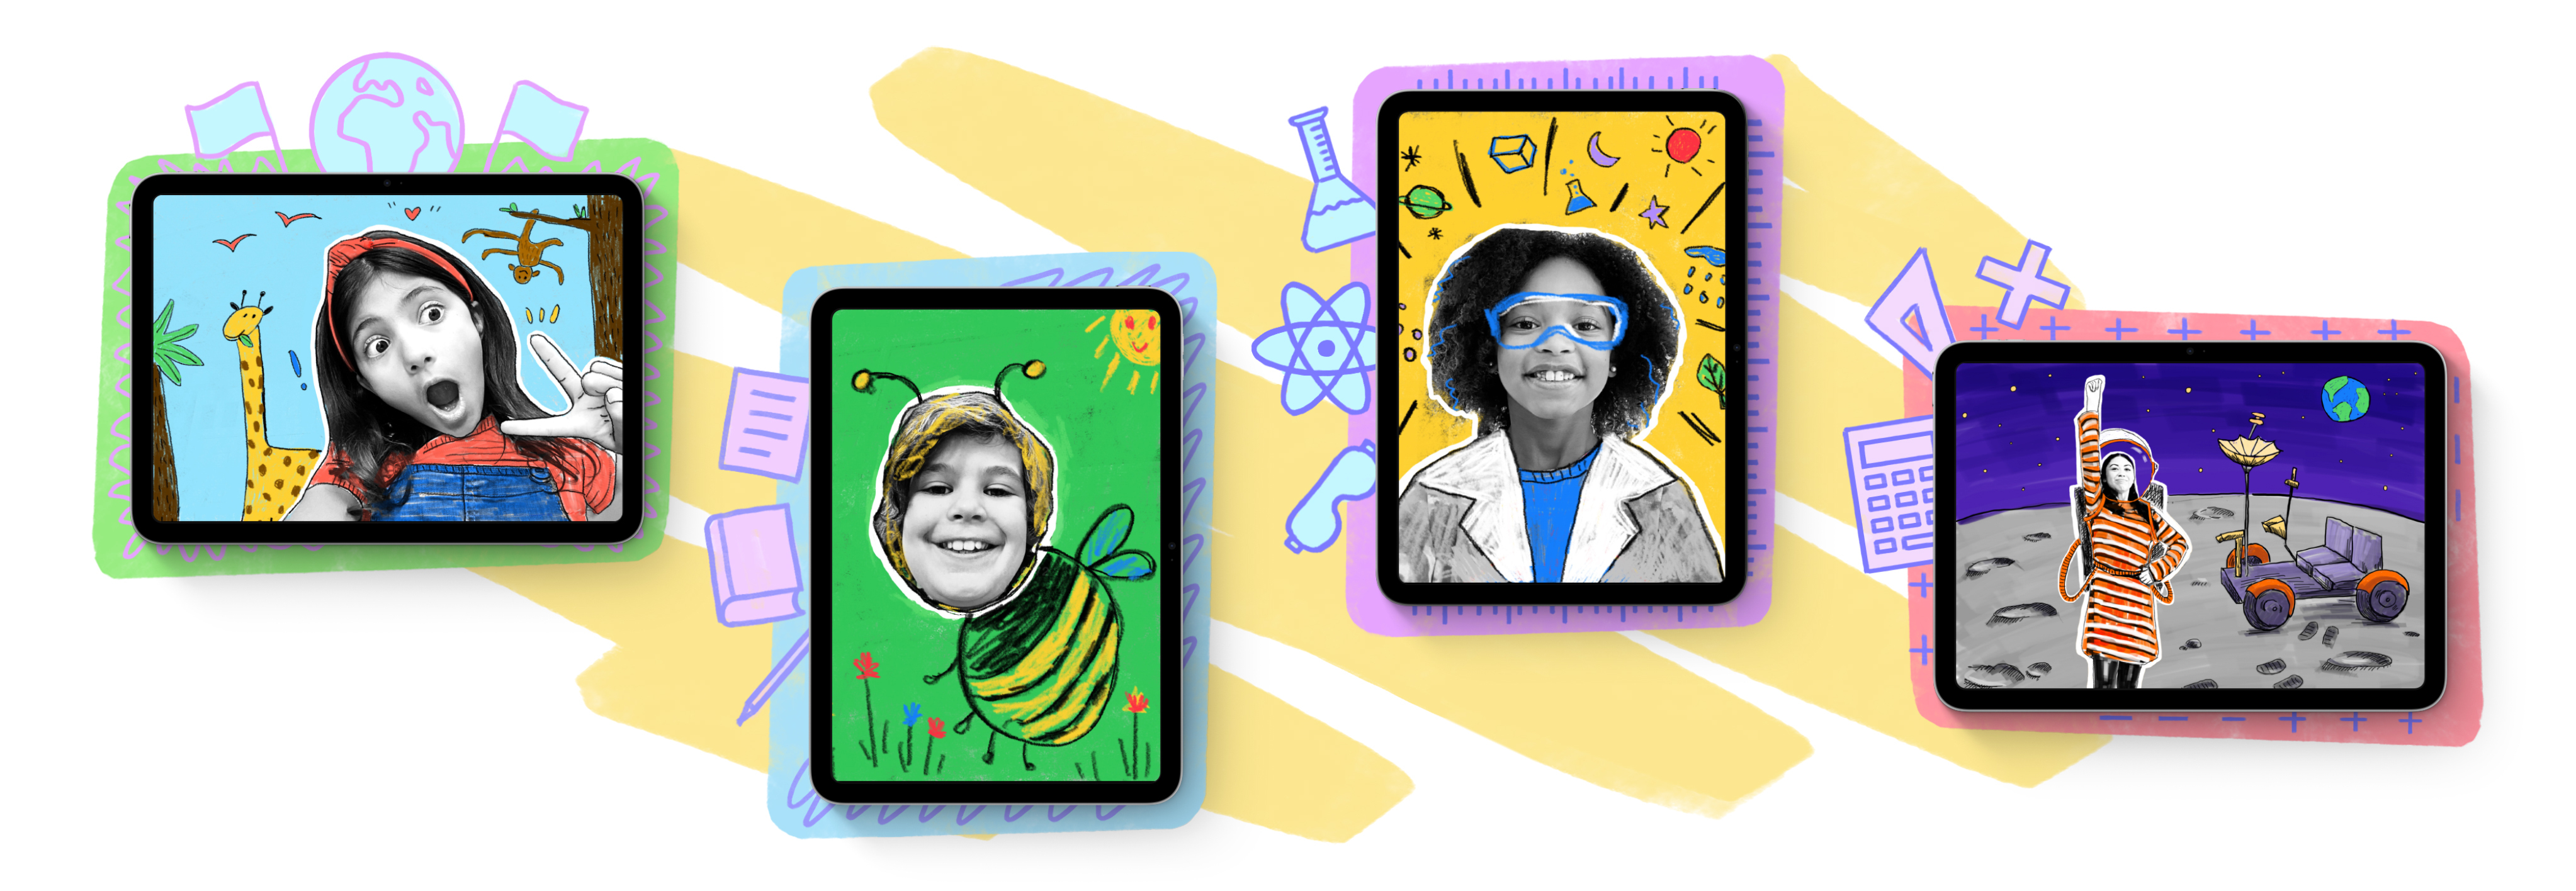 A gallery of elementary children framed in iPad and turned into colorful pop art using Apple's Everyone Can Create resources.